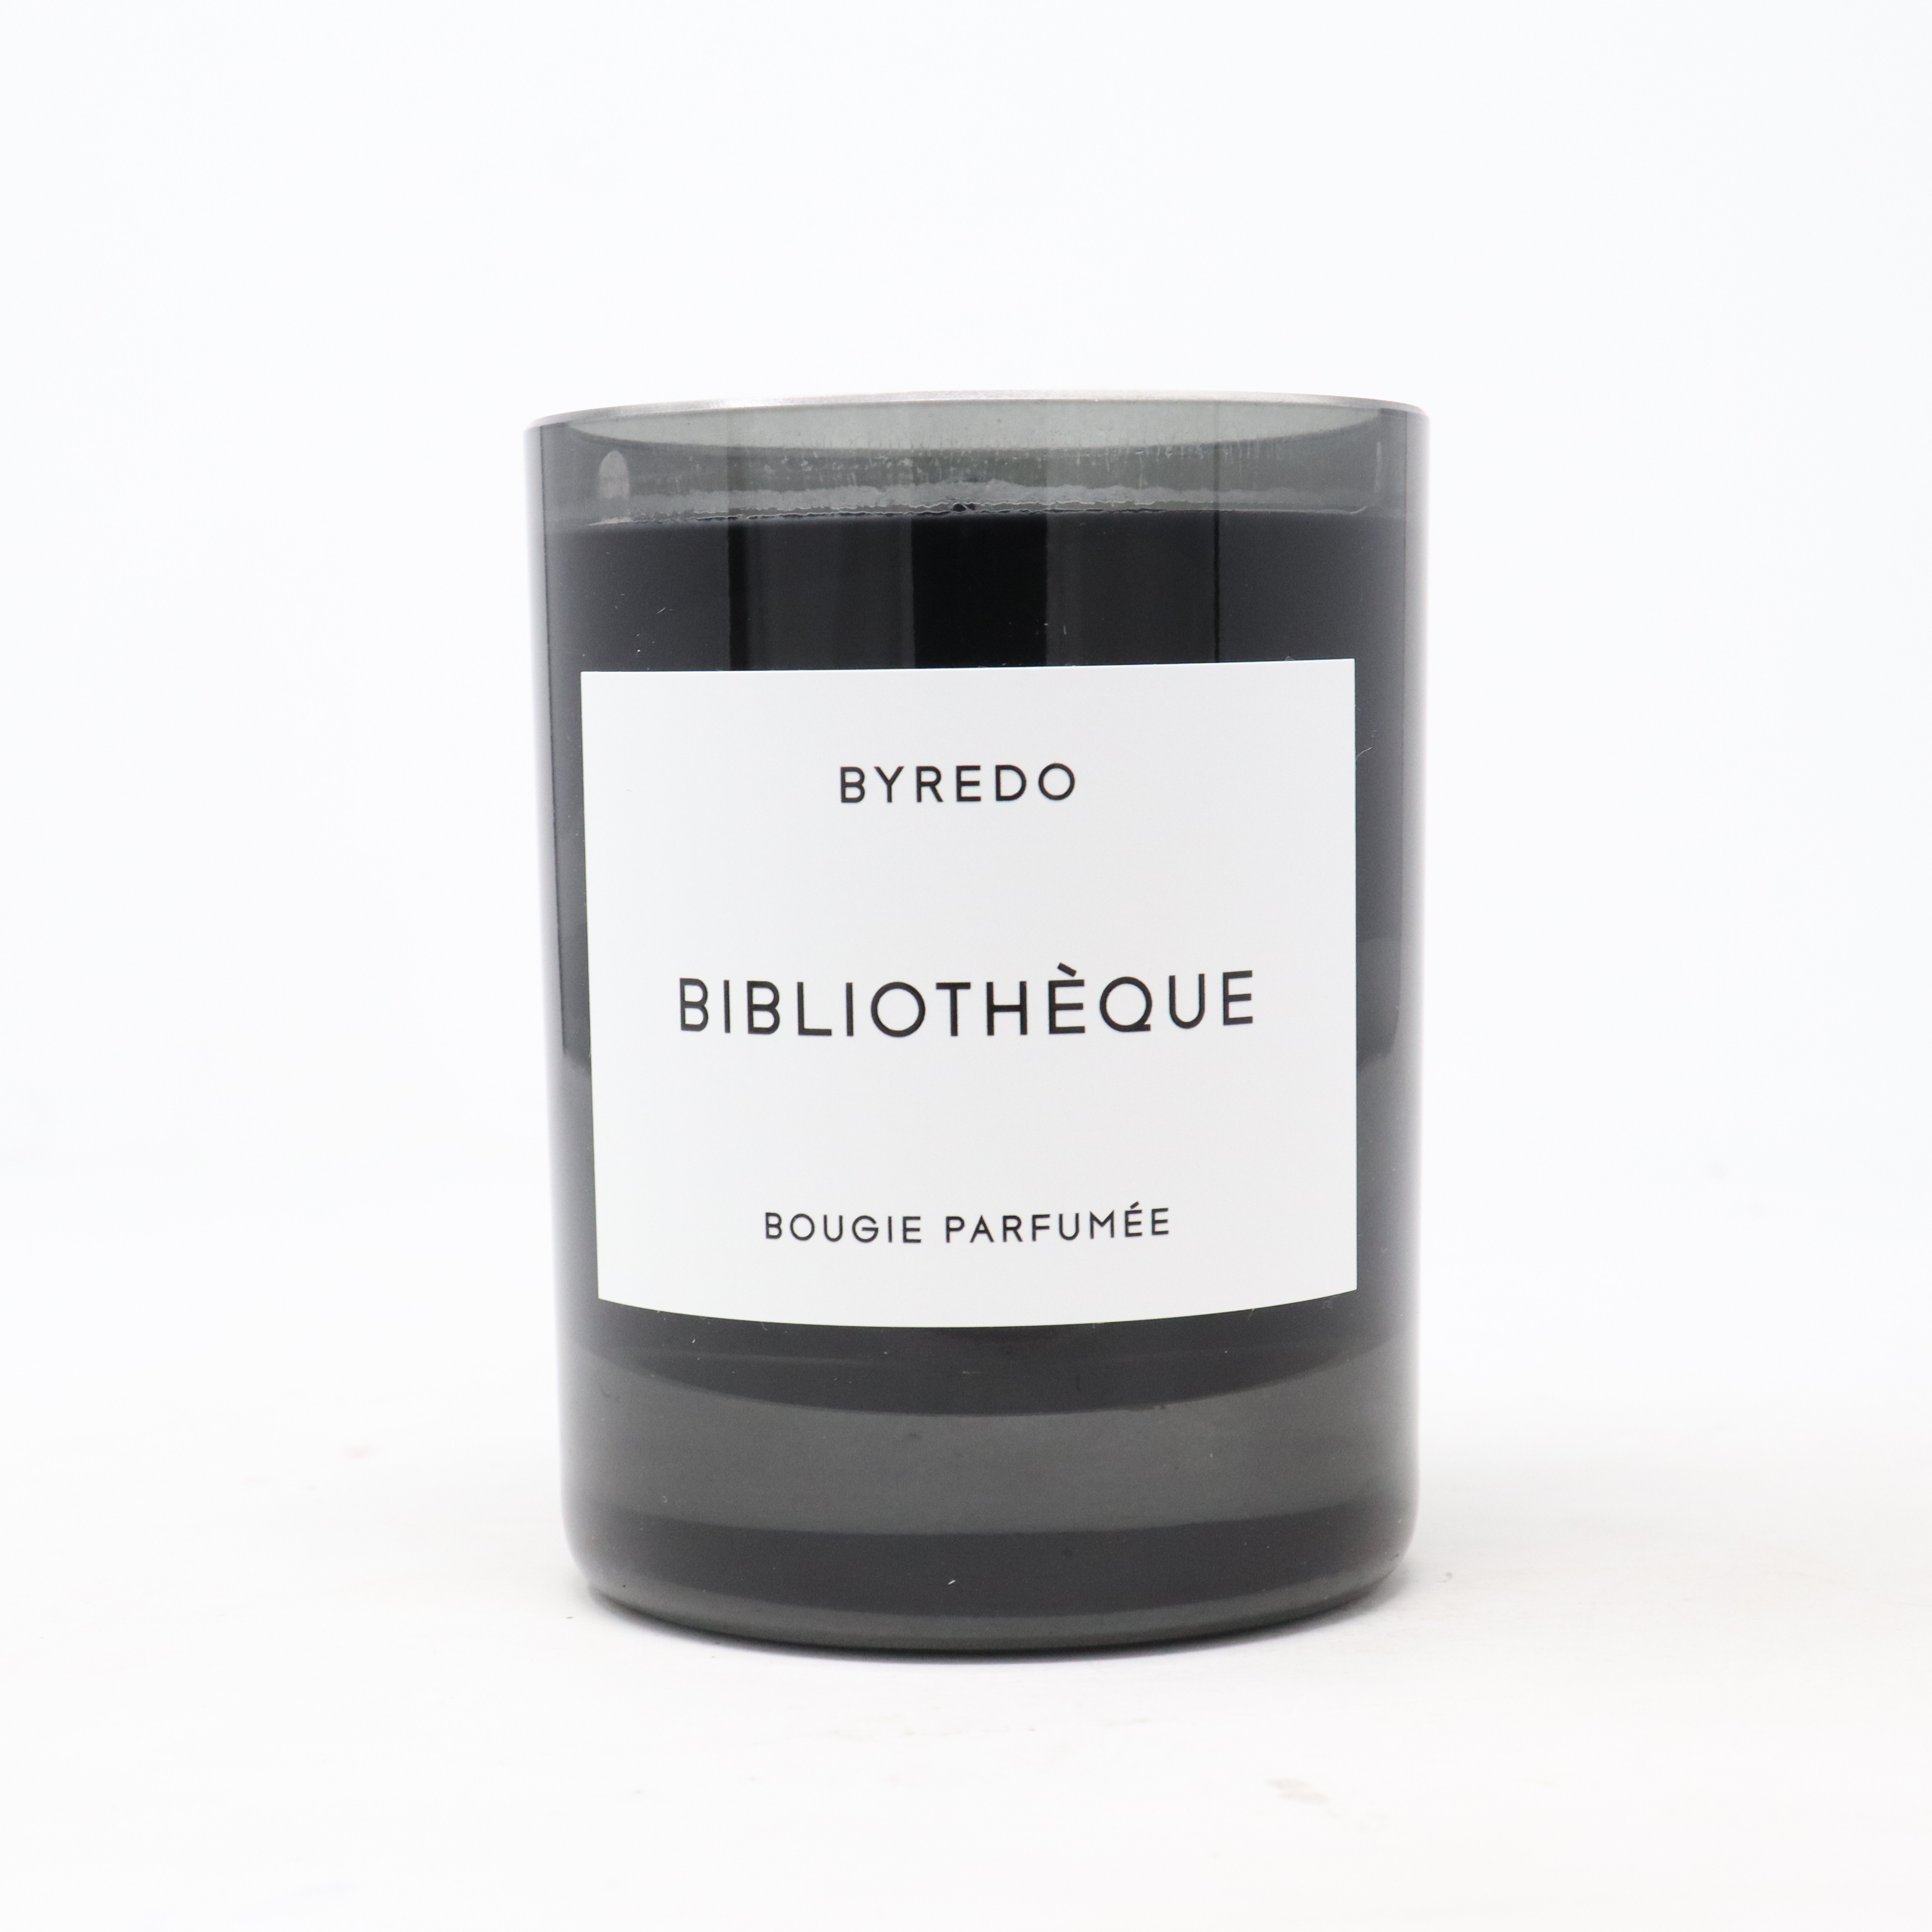 BYREDO Bibliotheque Fragranced Candle 8.4 Oz Unboxed for sale online | eBay